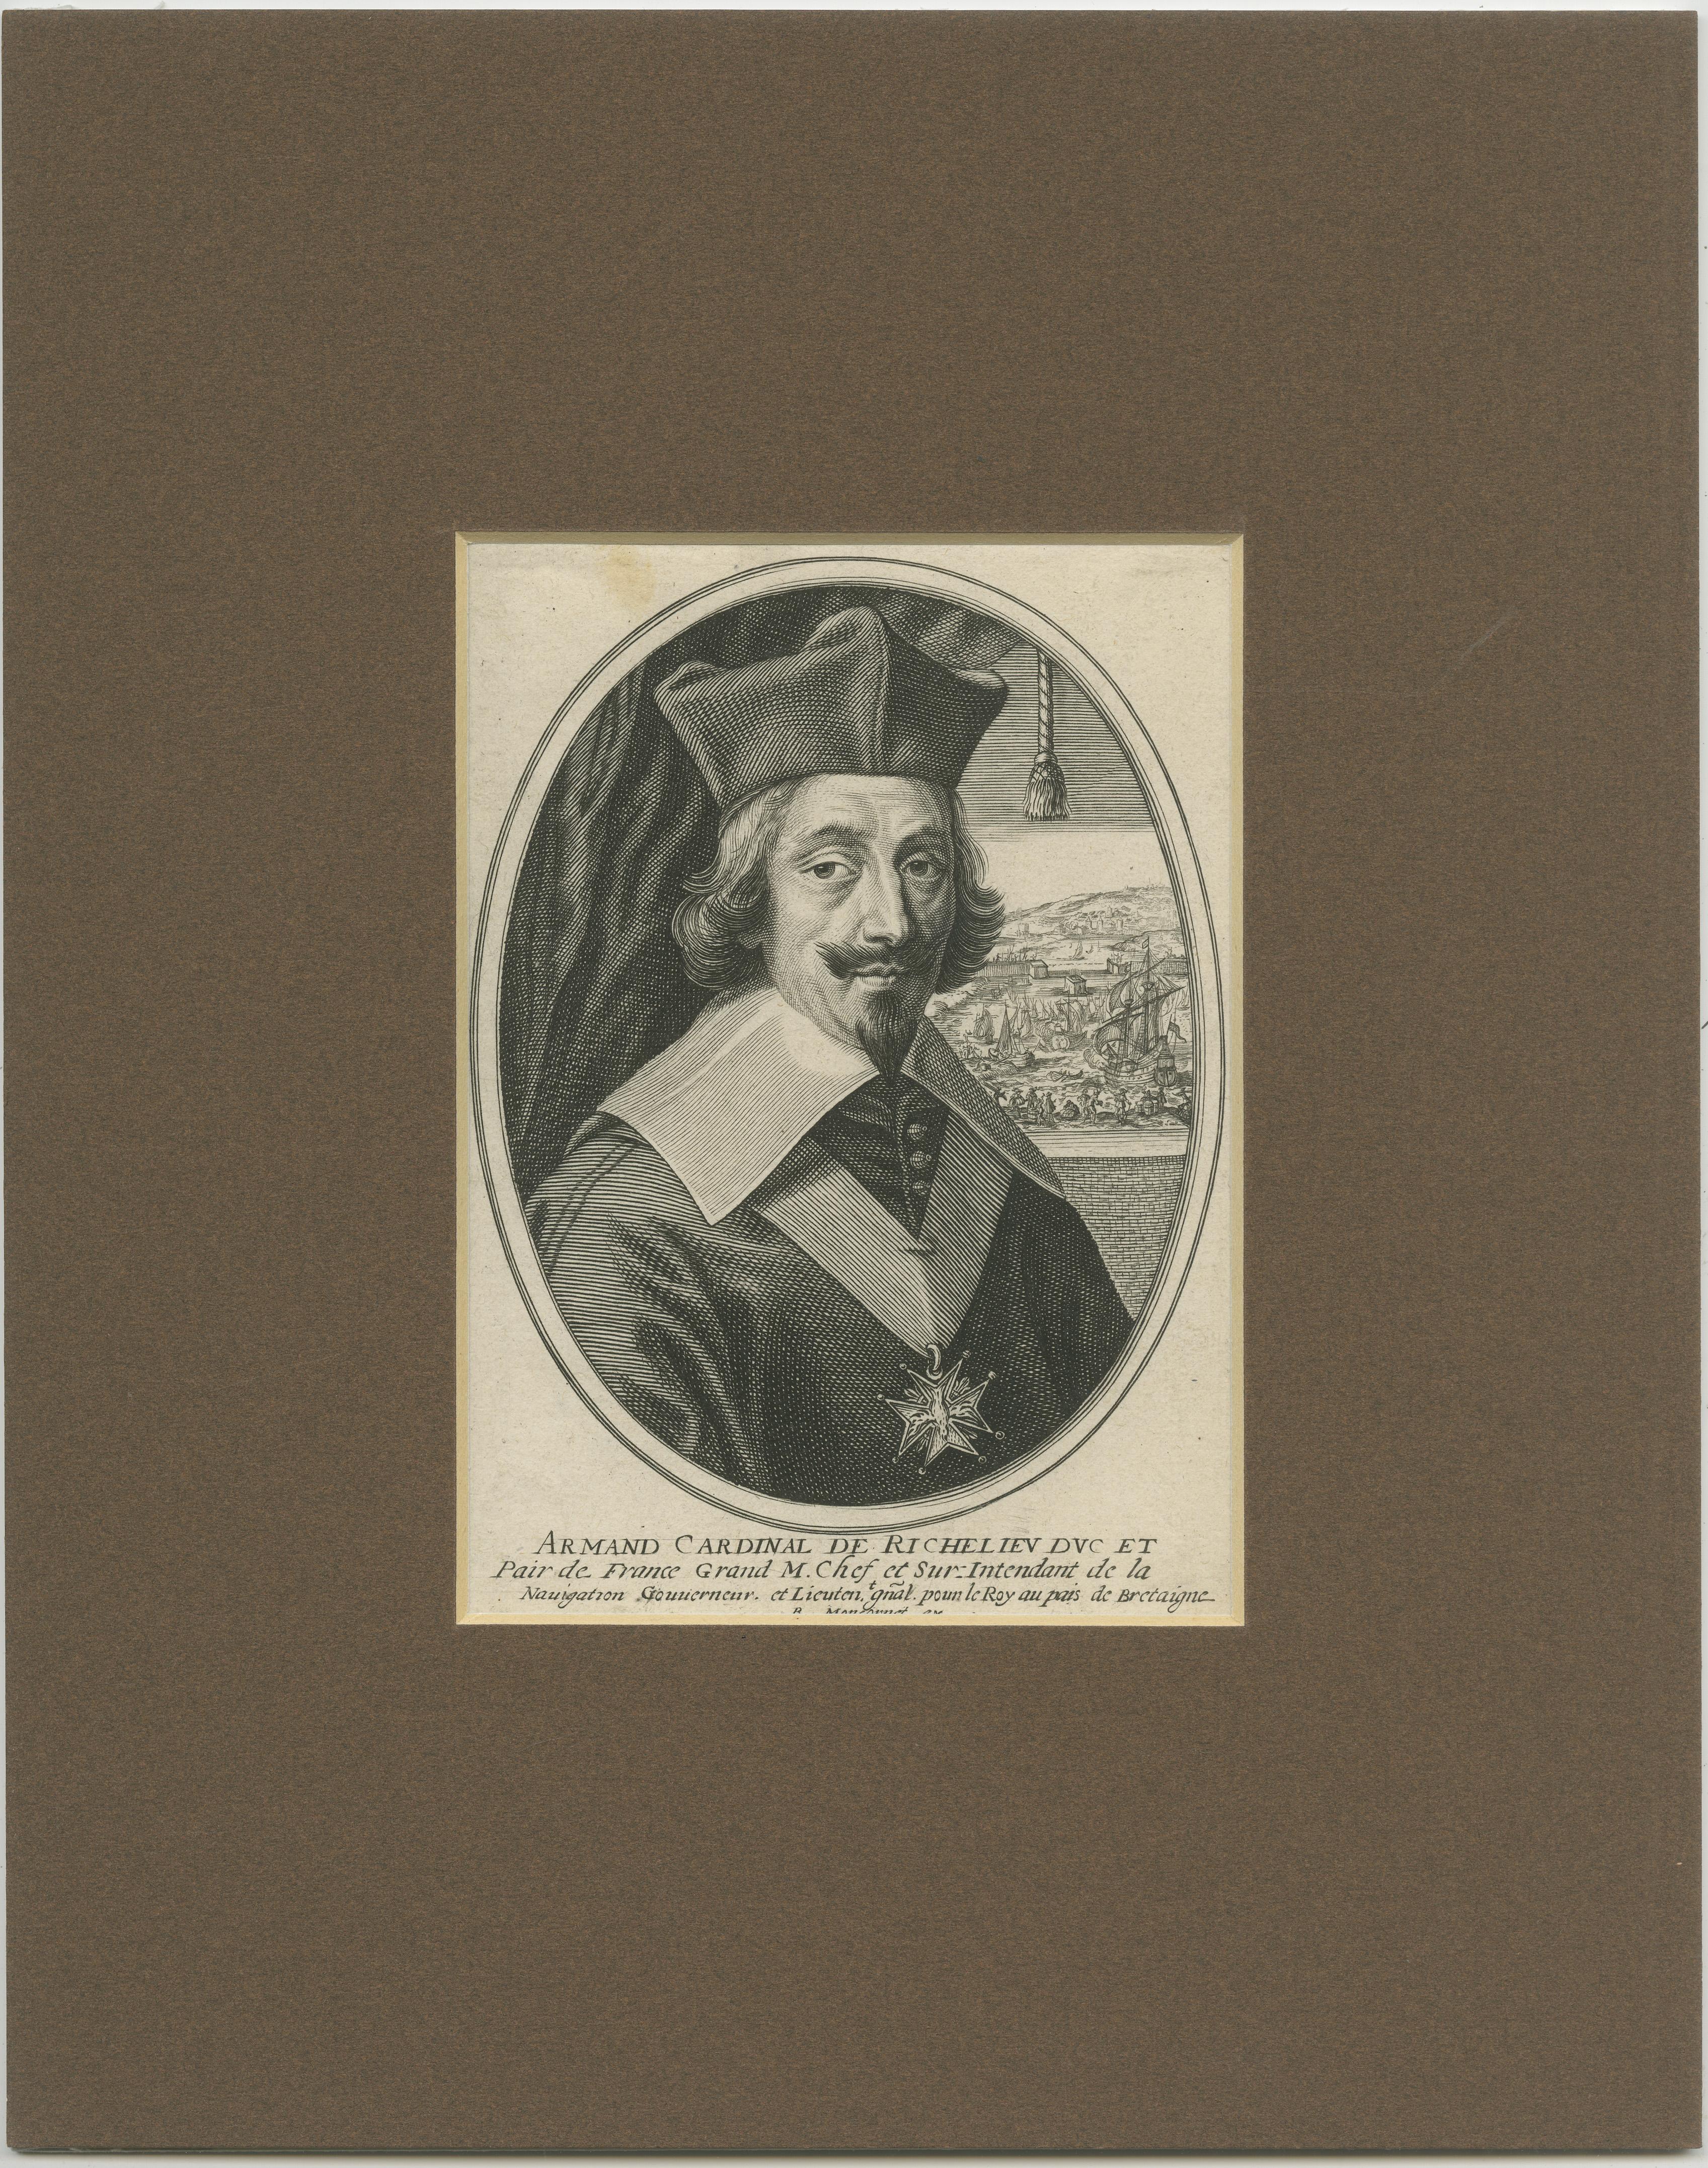 Antique print titled 'Armand Cardinal de Richelien (..)'. Portrait of Cardinal Richelieu, bust-length directed to right, wearing biretta, mozzetta, insignia of the order of the Holy Ghost; in the background, a curtain, and a naval battle; in